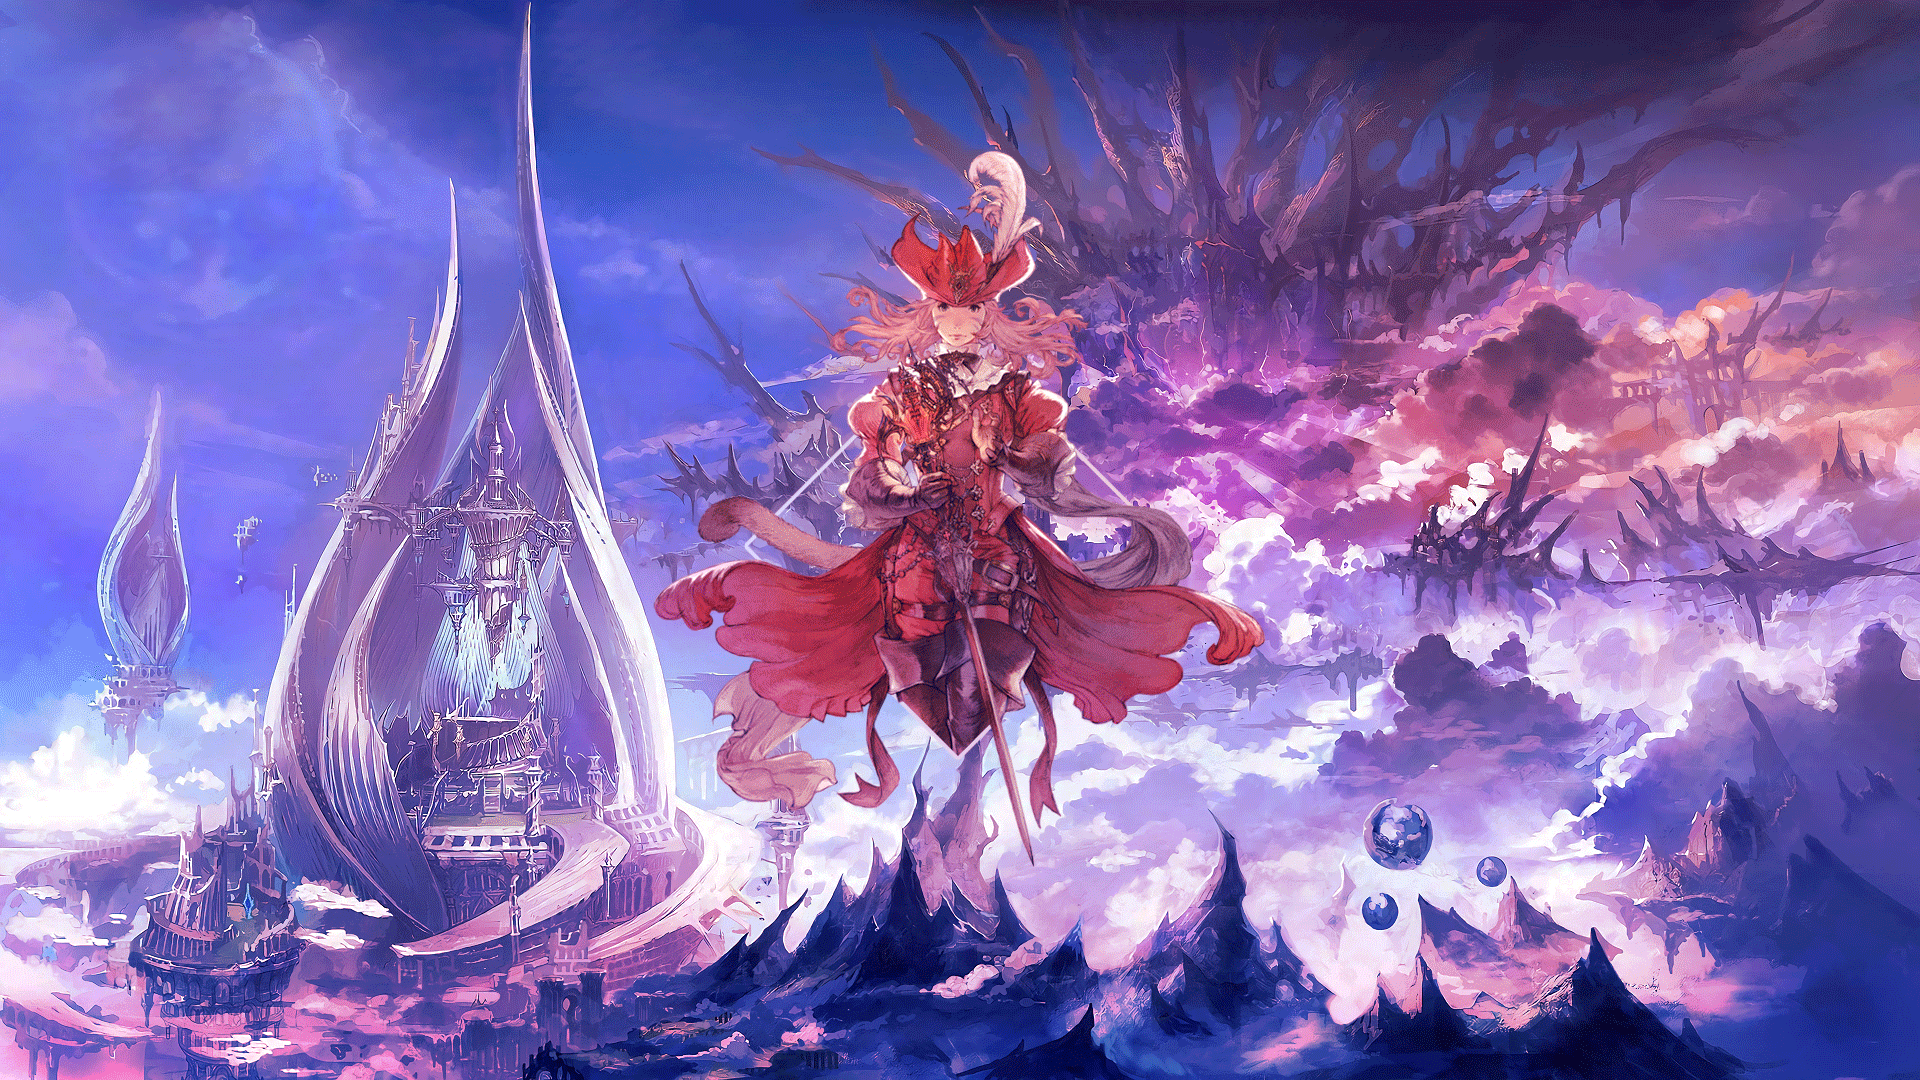 General 1920x1080 Final Fantasy XIV: A Realm Reborn magician red picture-in-picture photoshopped digital art